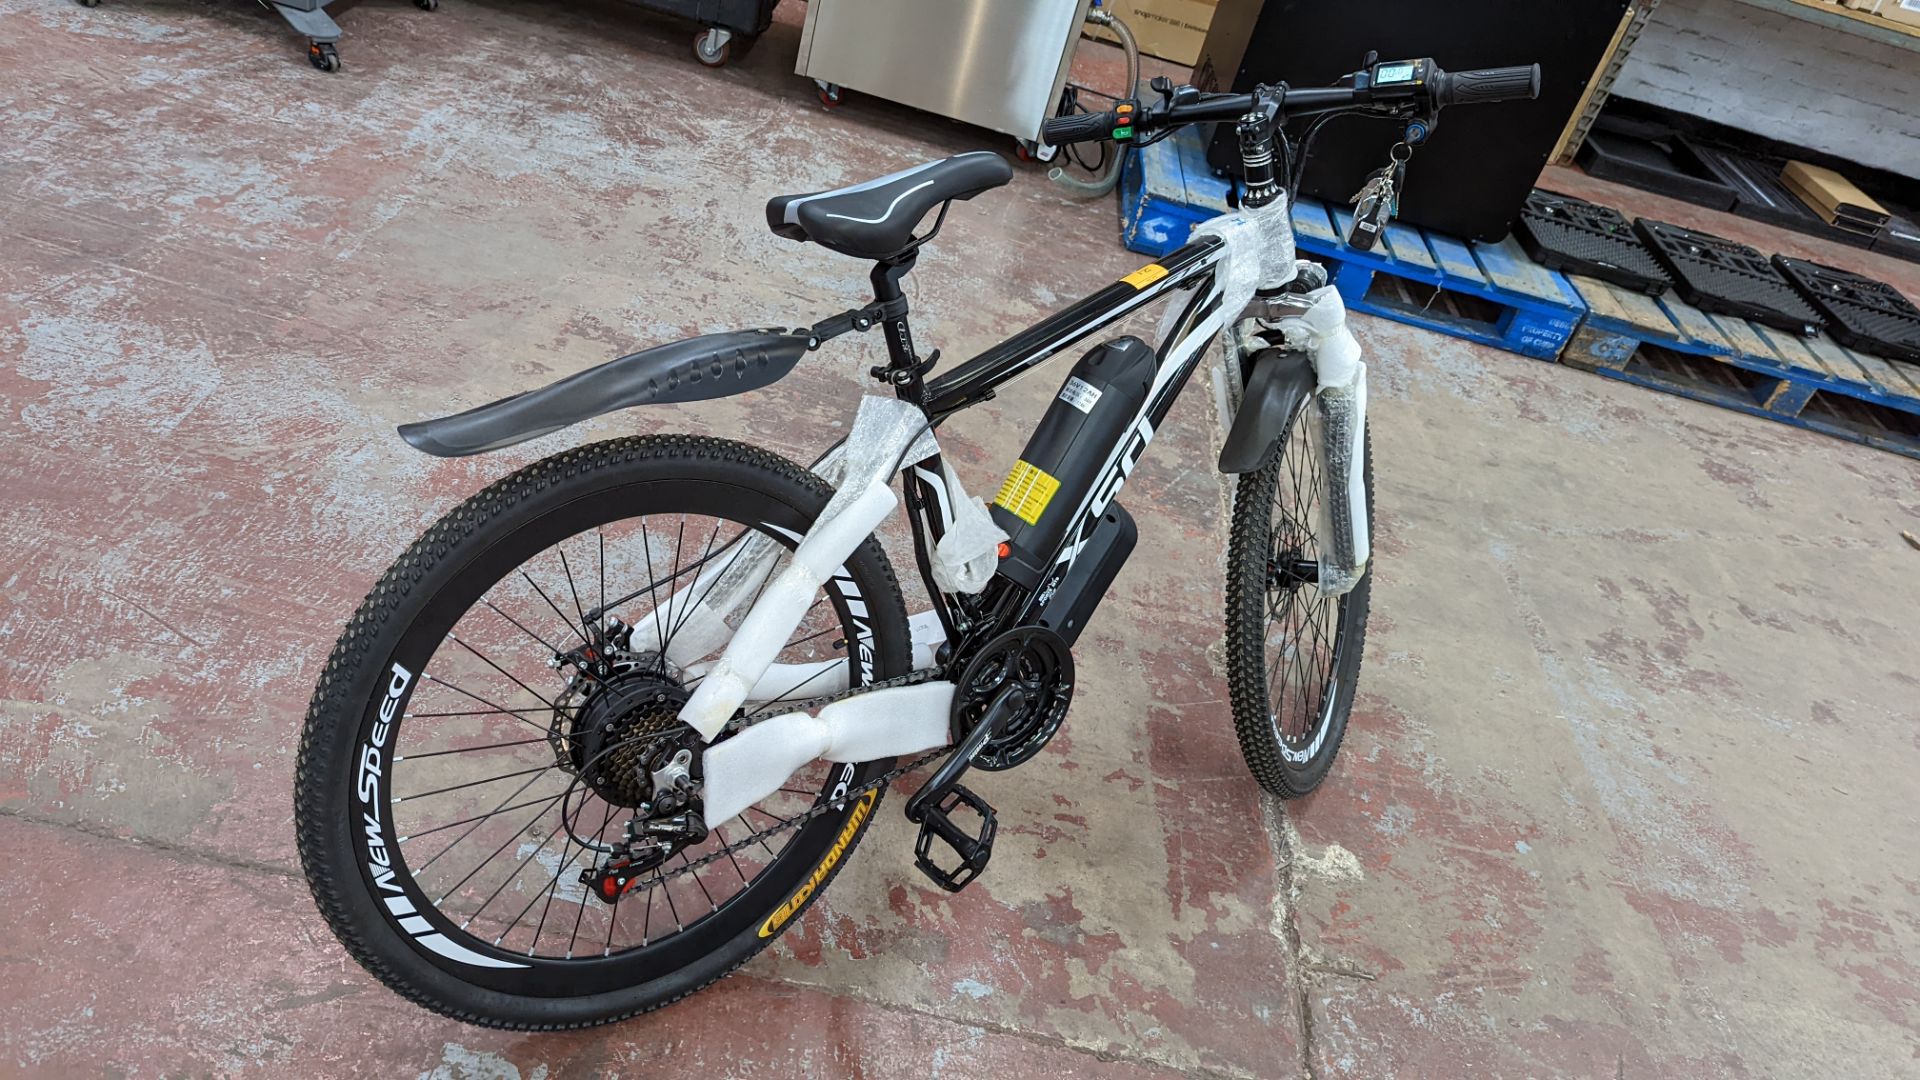 XSD FTX Sport MTB 7.5 Racing electric bike with Shimano Tourney TZ gears. Includes 36v 12AH battery, - Image 11 of 26